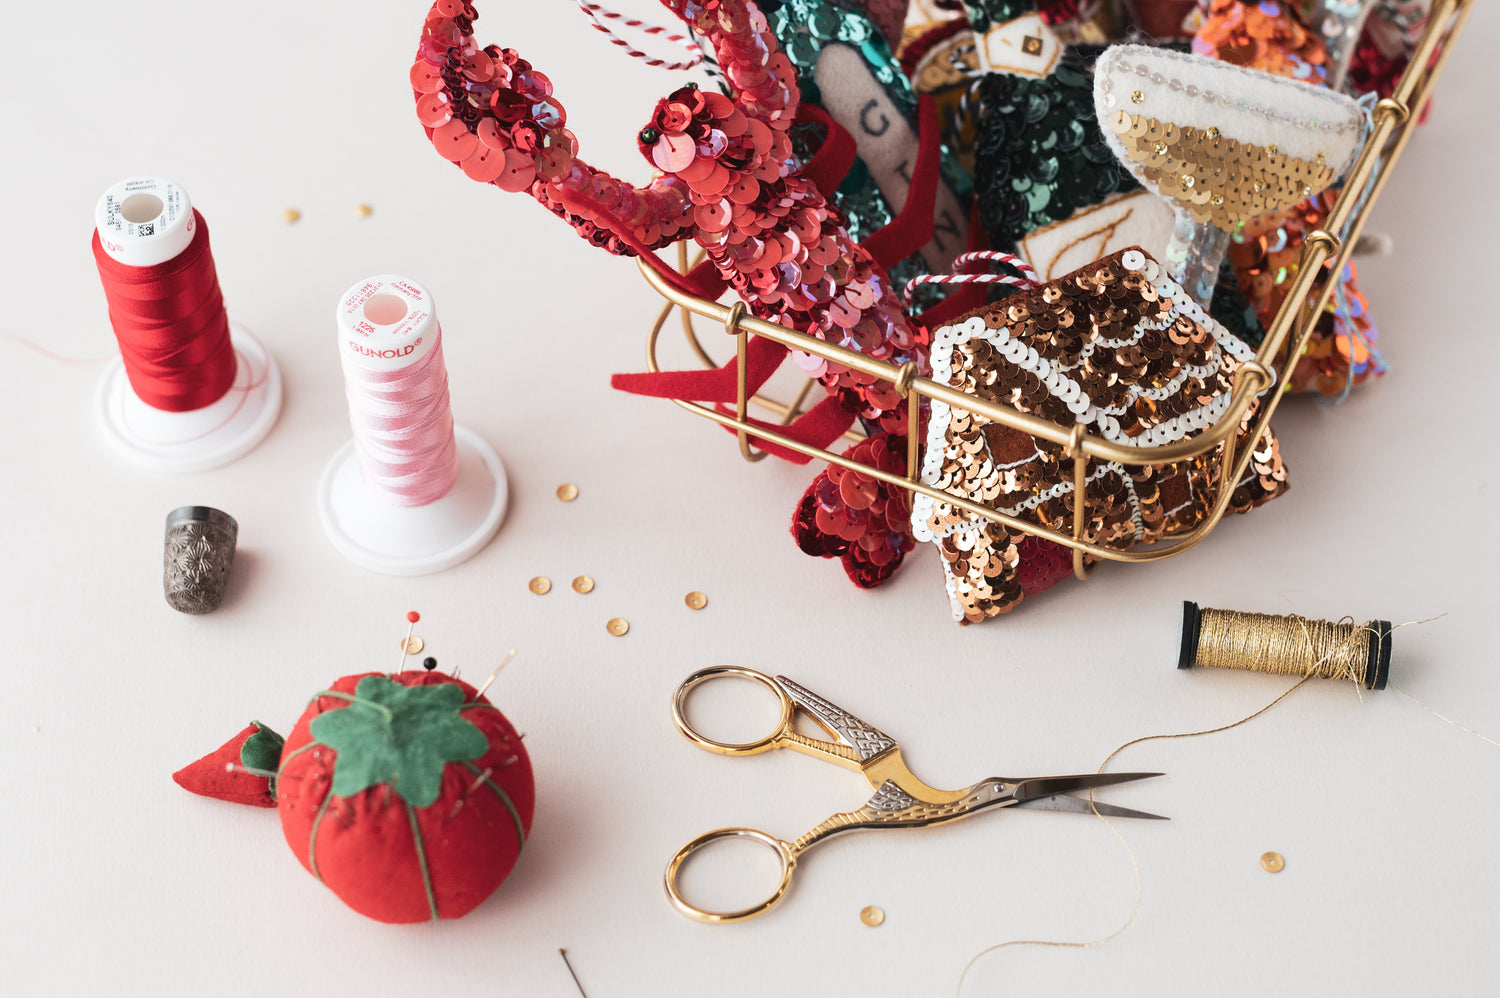 a collection of sequin ornaments including a lobster and gingerbread house on my desk. wit hthreads, needles and sequins scattered around